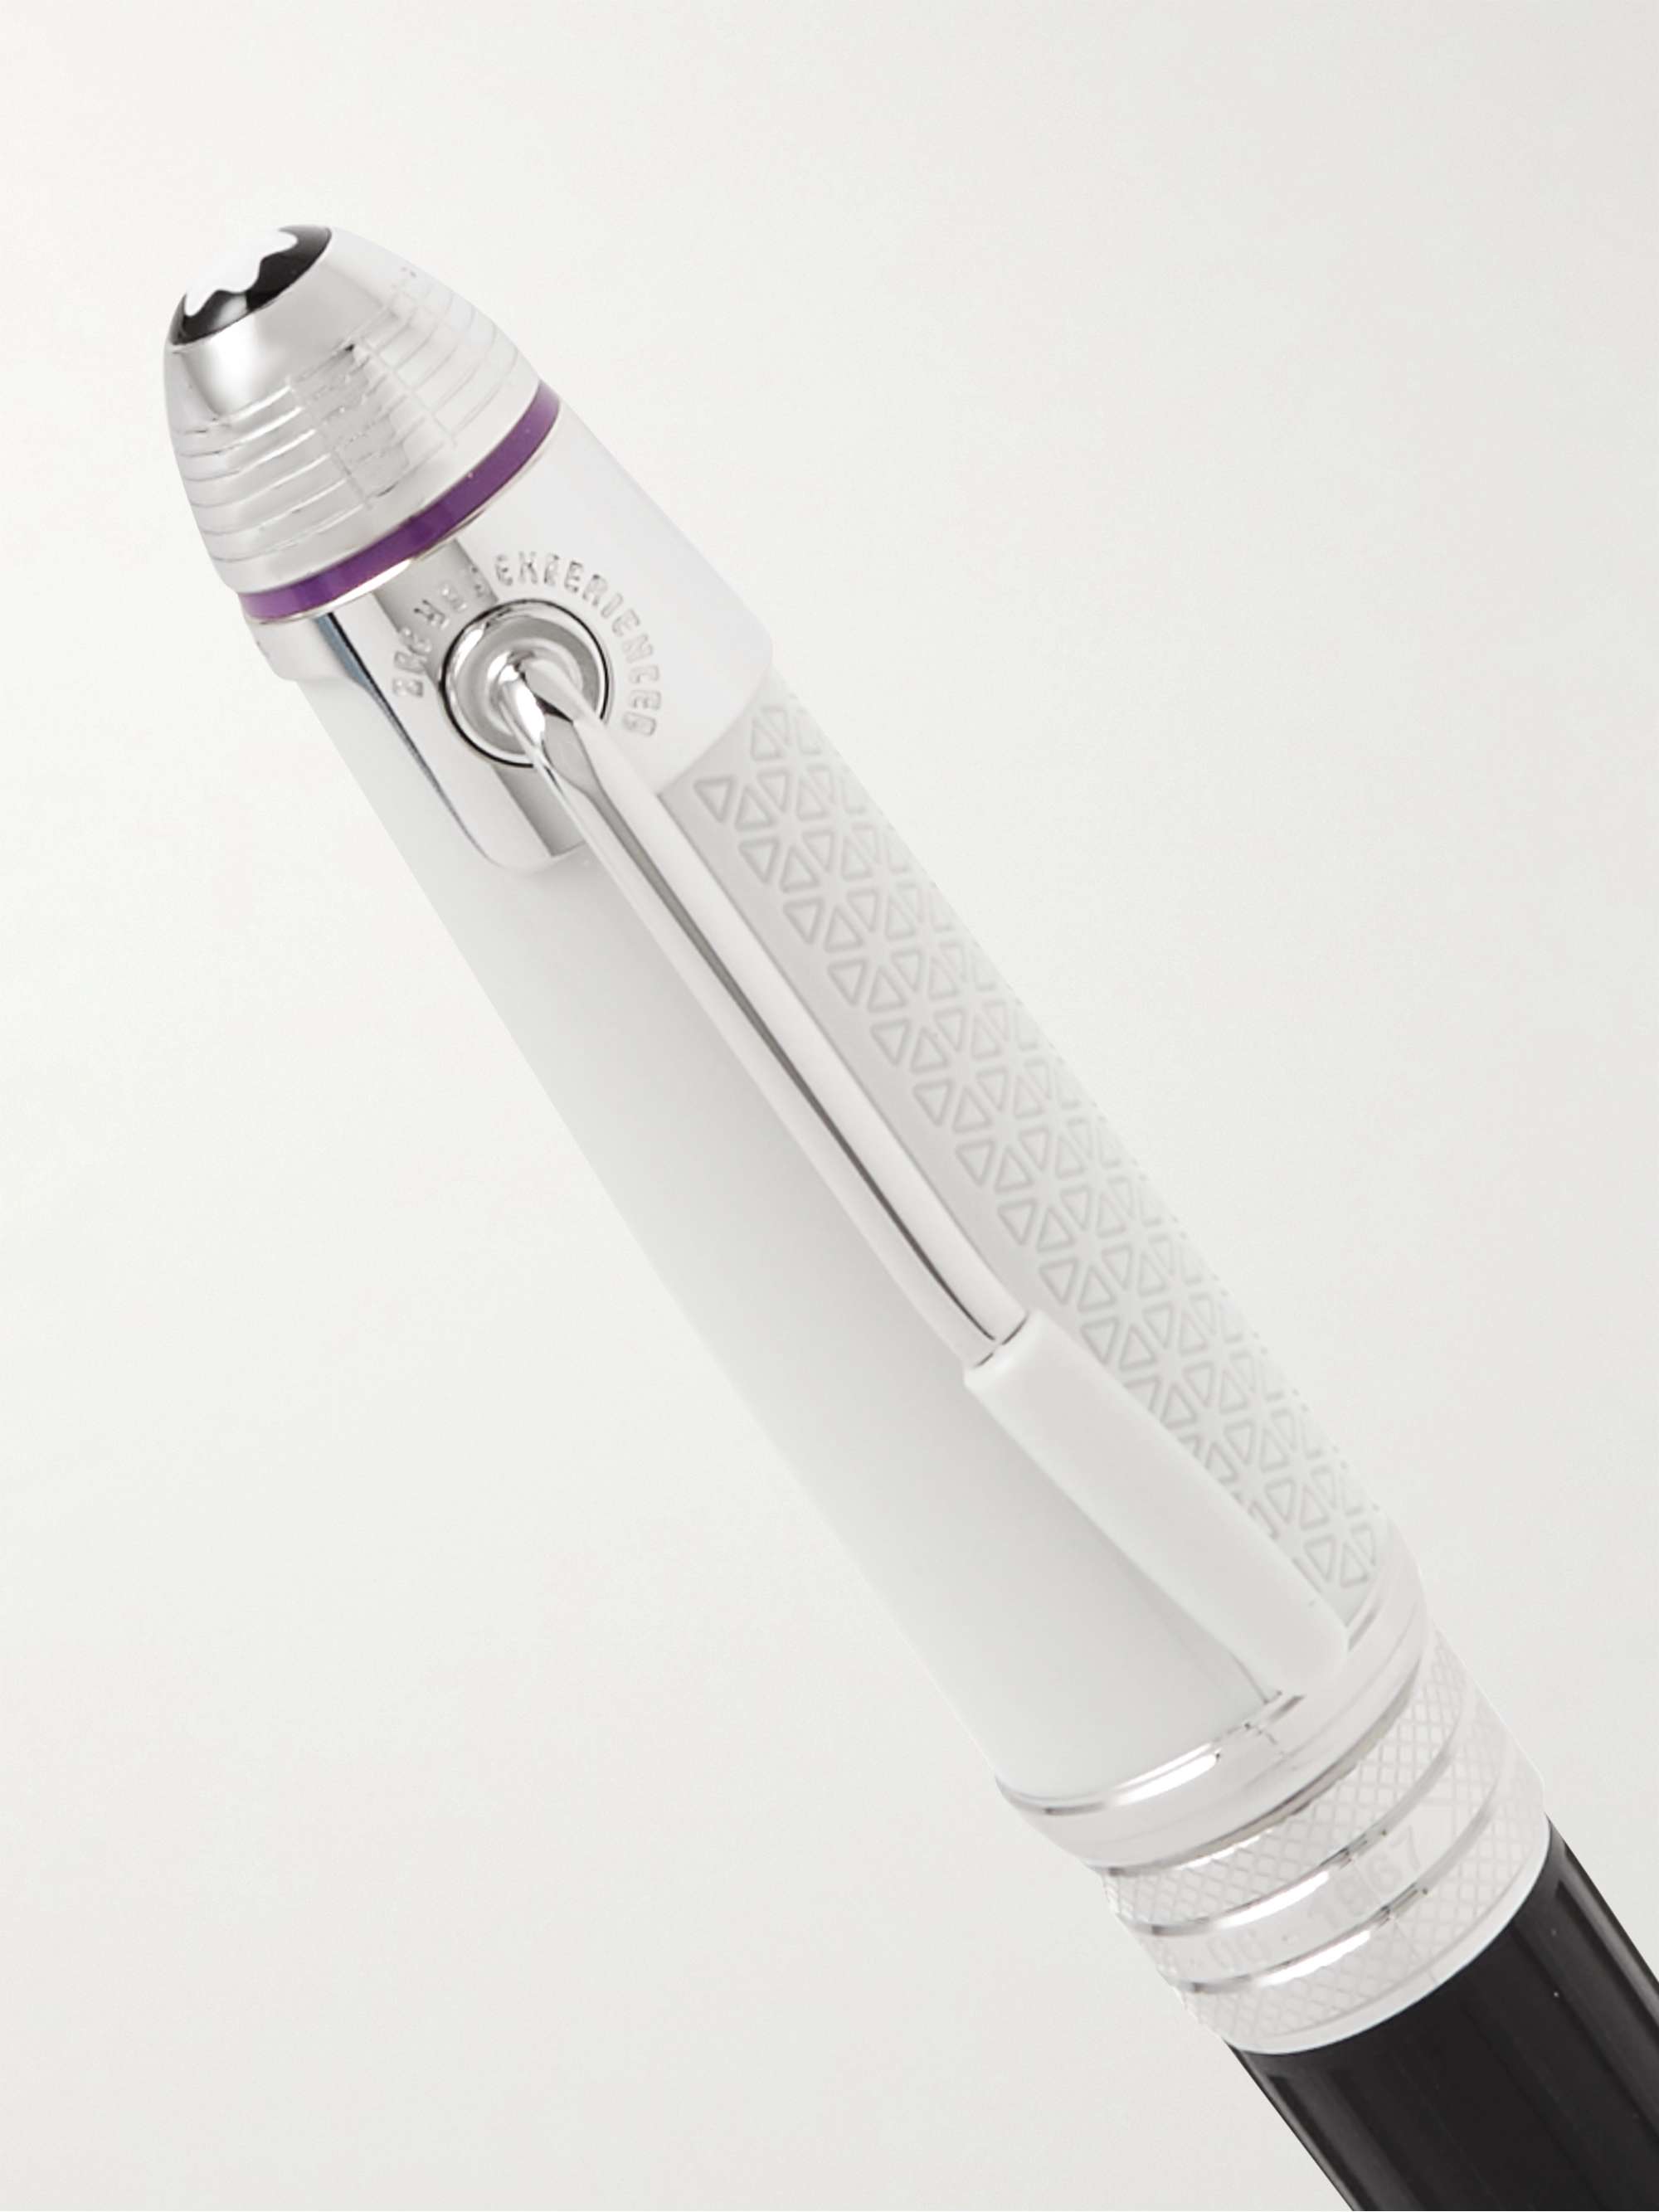 MONTBLANC + Jimi Hendrix Resin and Platinum-Plated Rollerball Pen